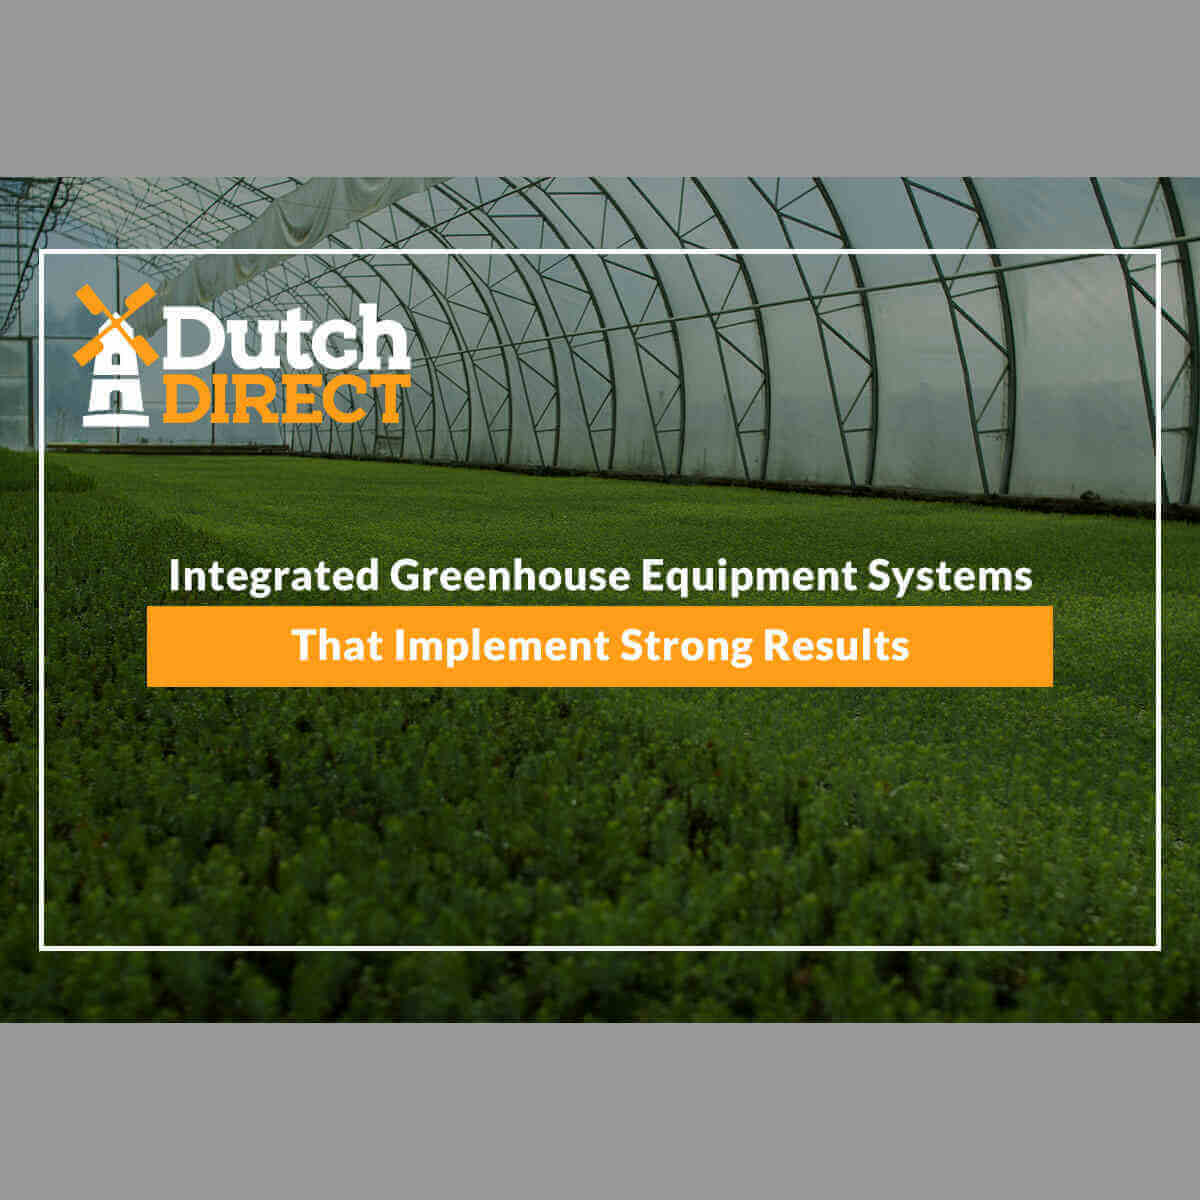 Integrated Greenhouse Equipment Systems That Implement Strong Results